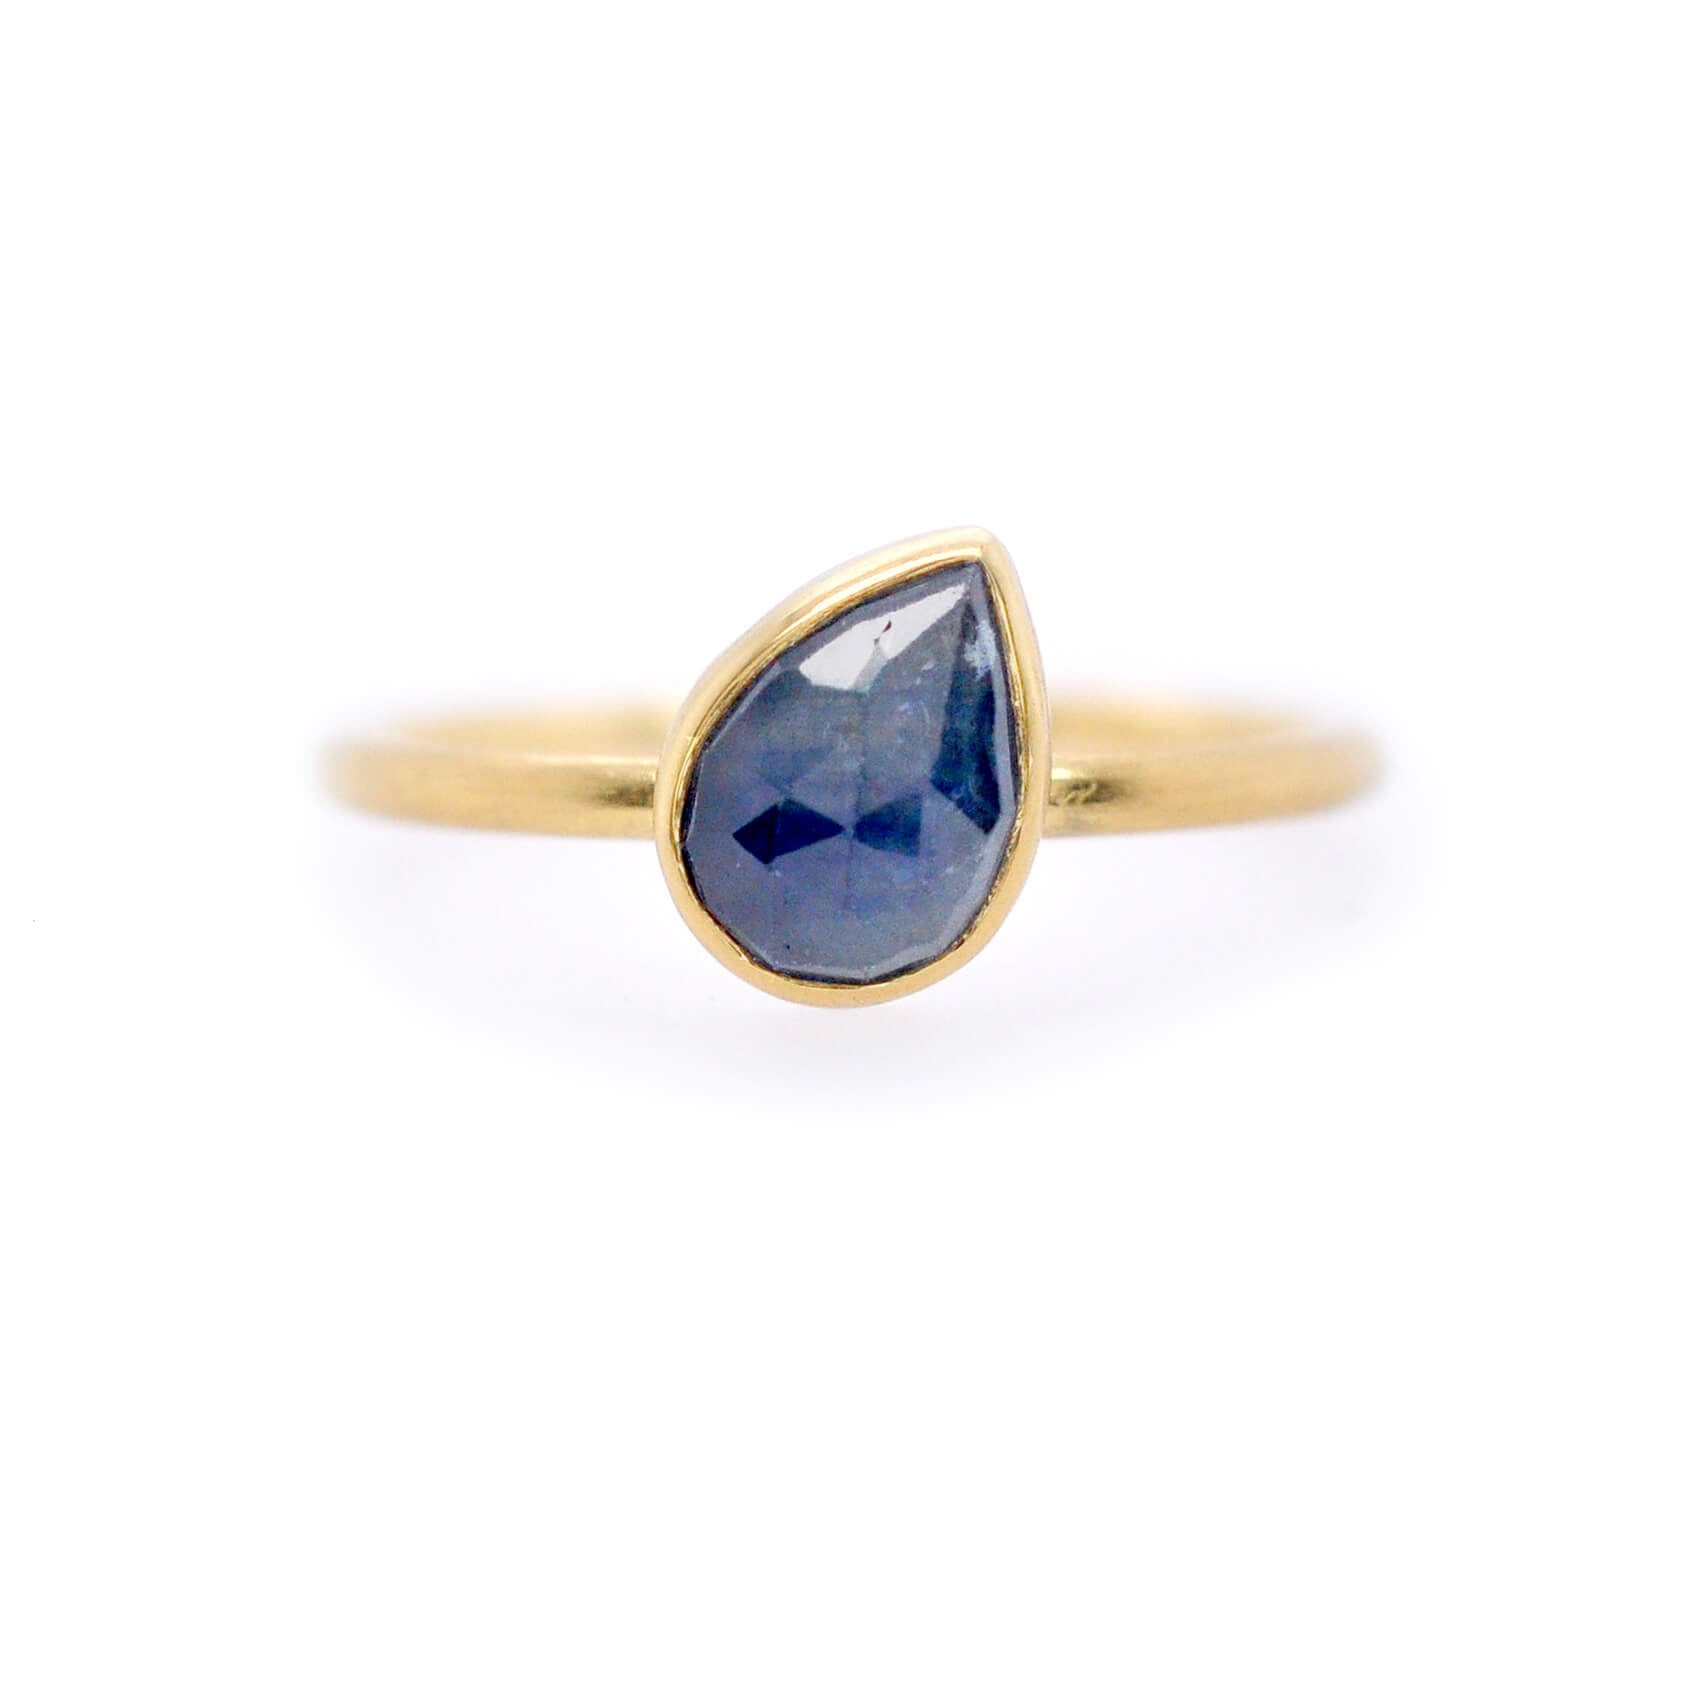 Blue rose cut sapphire set in 18k yellow gold. Handmade by EC Design Jewelry in Minneapolis, MN using recycled metal and conflict-free stone.